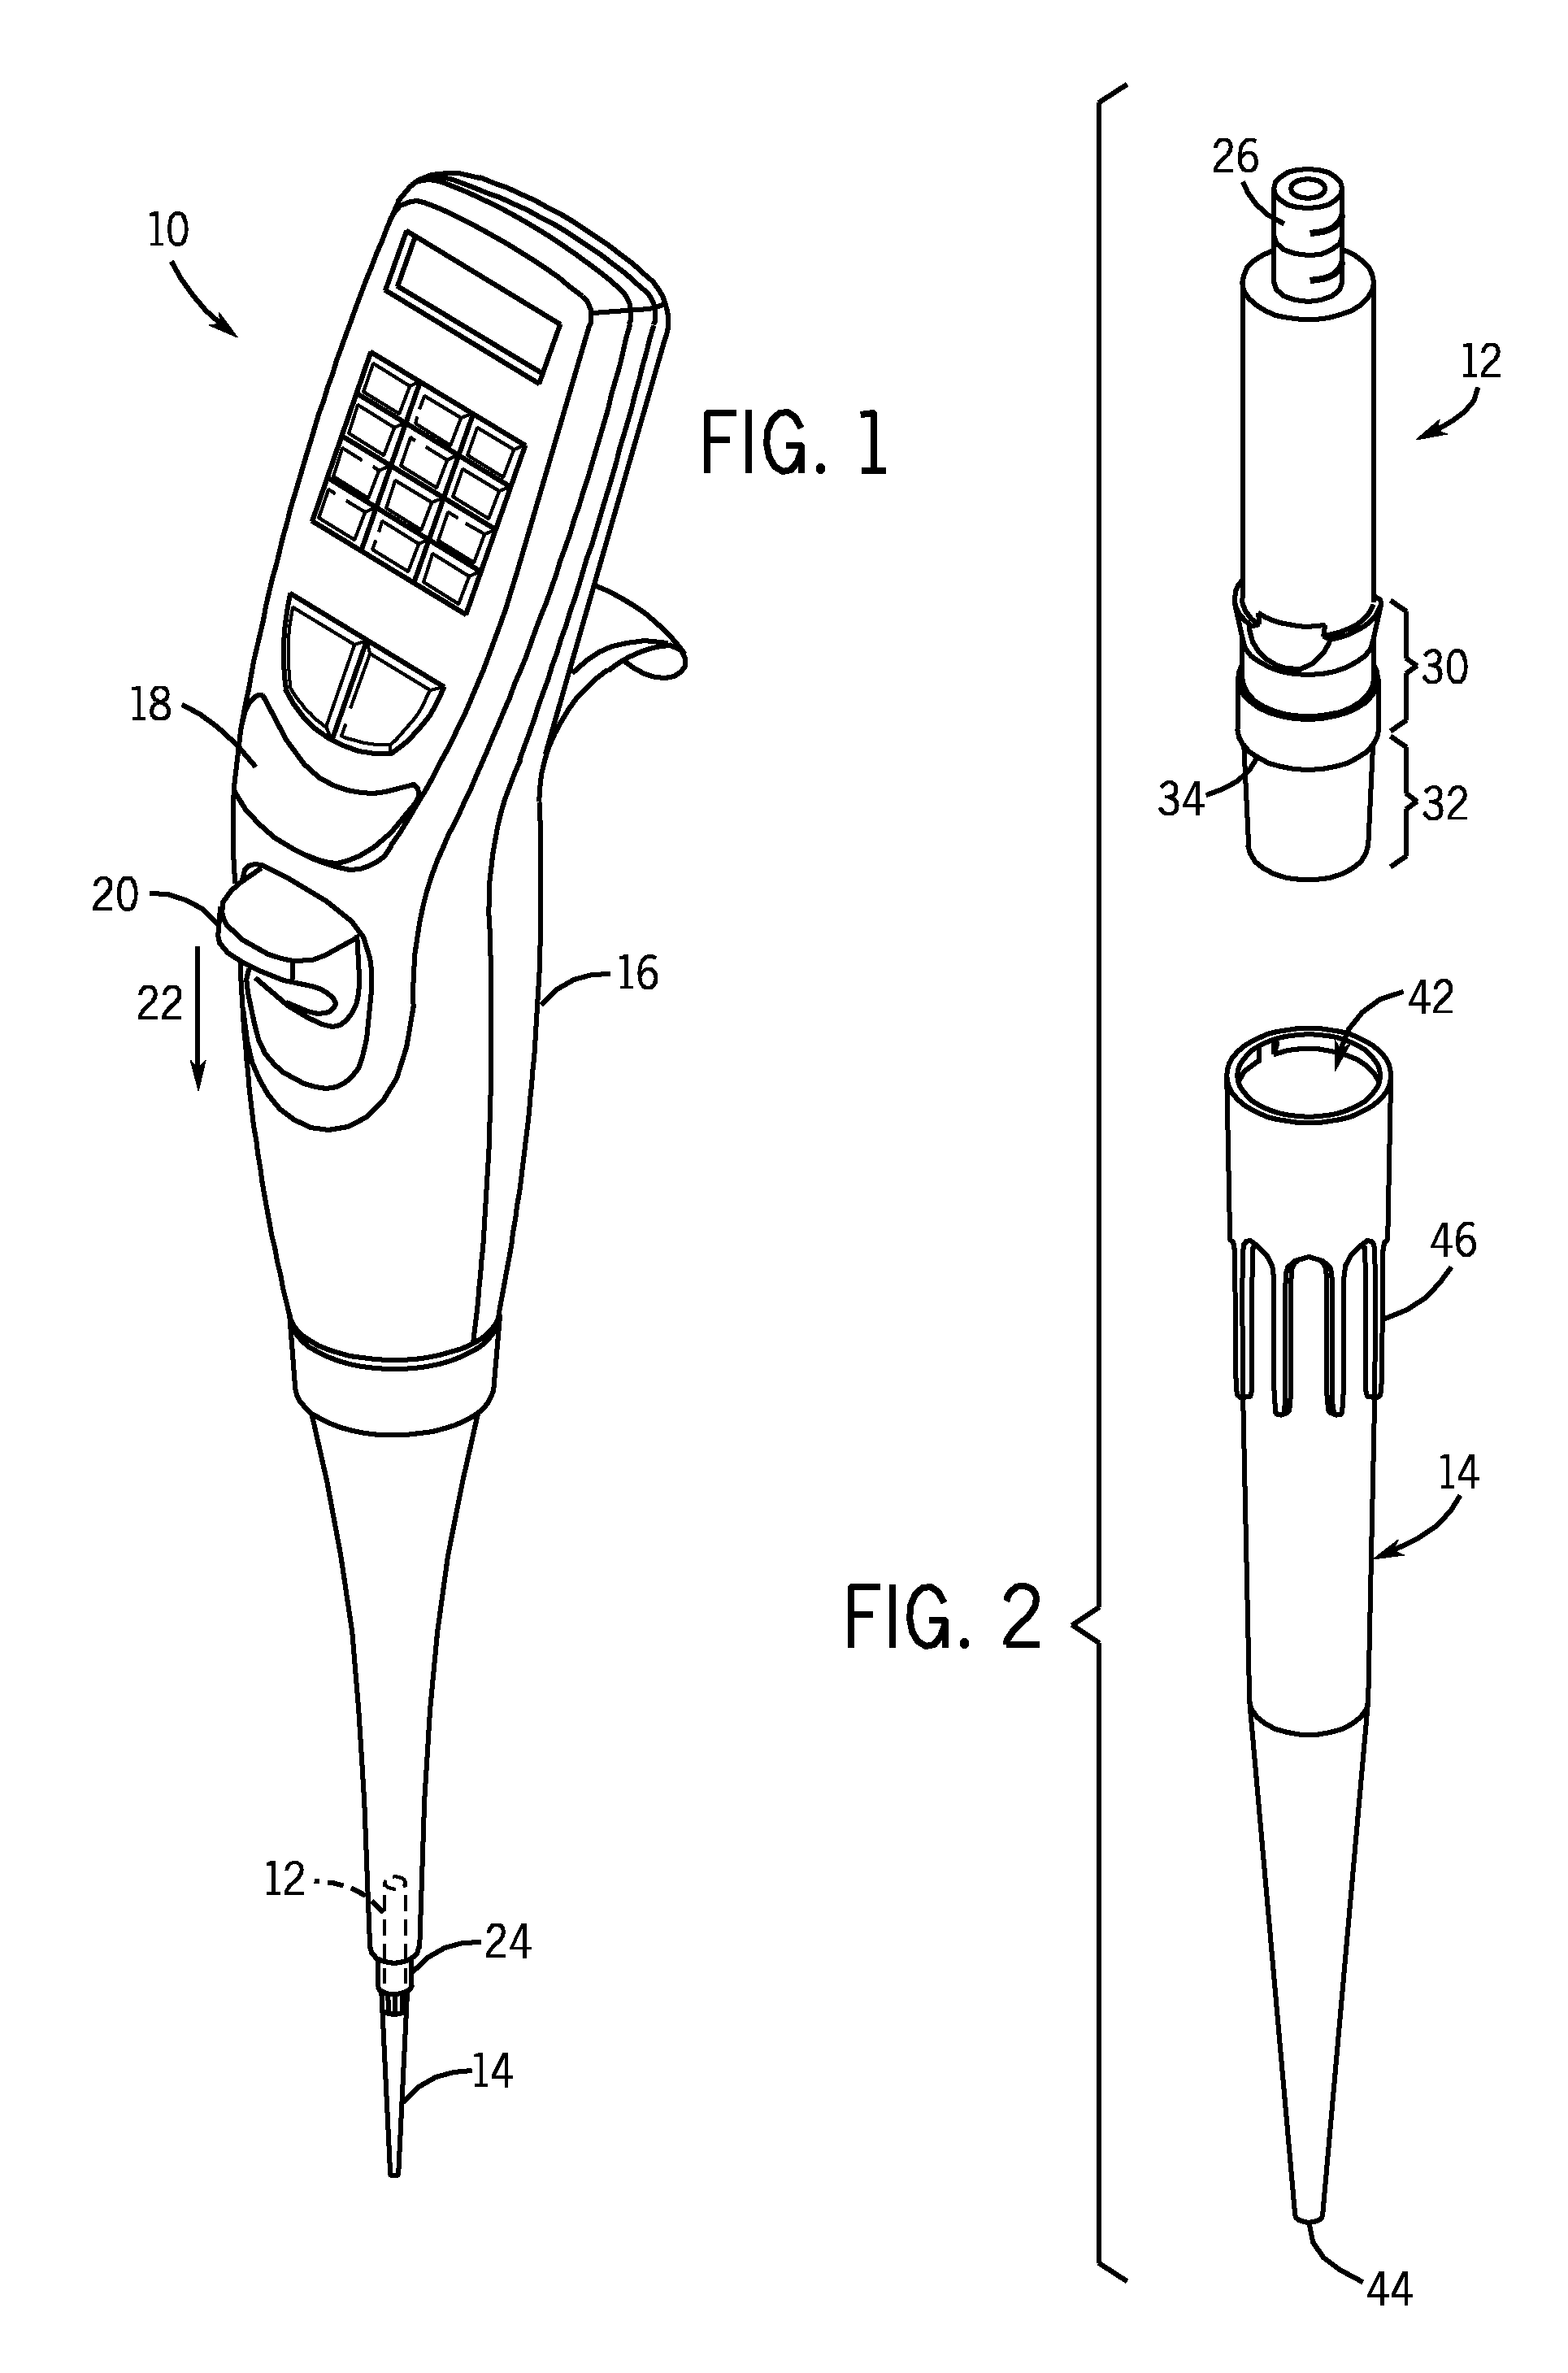 Locking pipette tip and mounting shaft